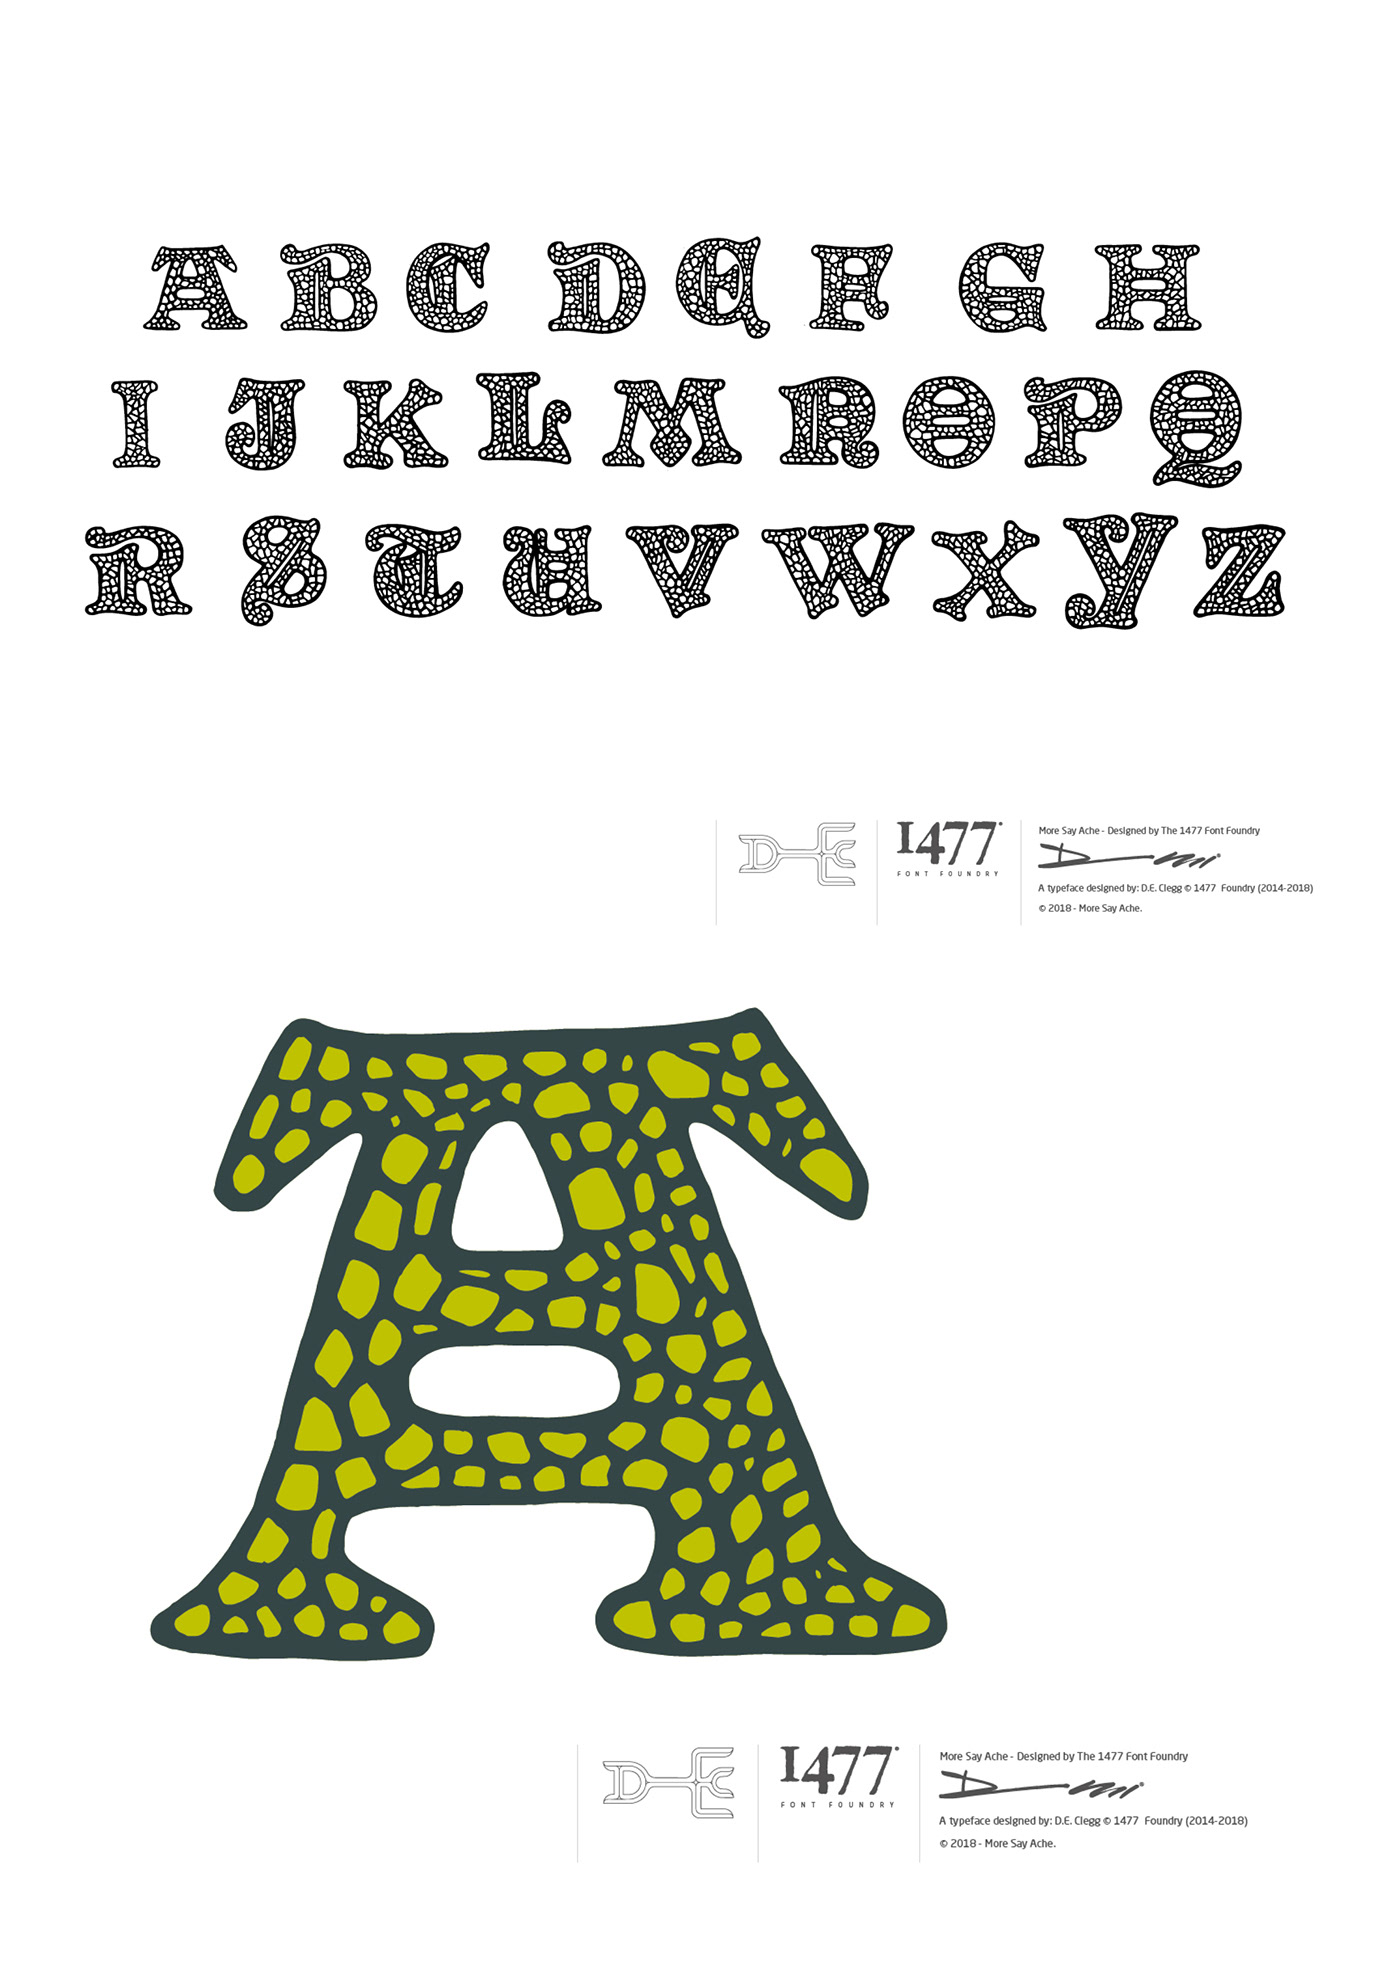 More Say Ache - Typeface Design David Clegg hand drawn font